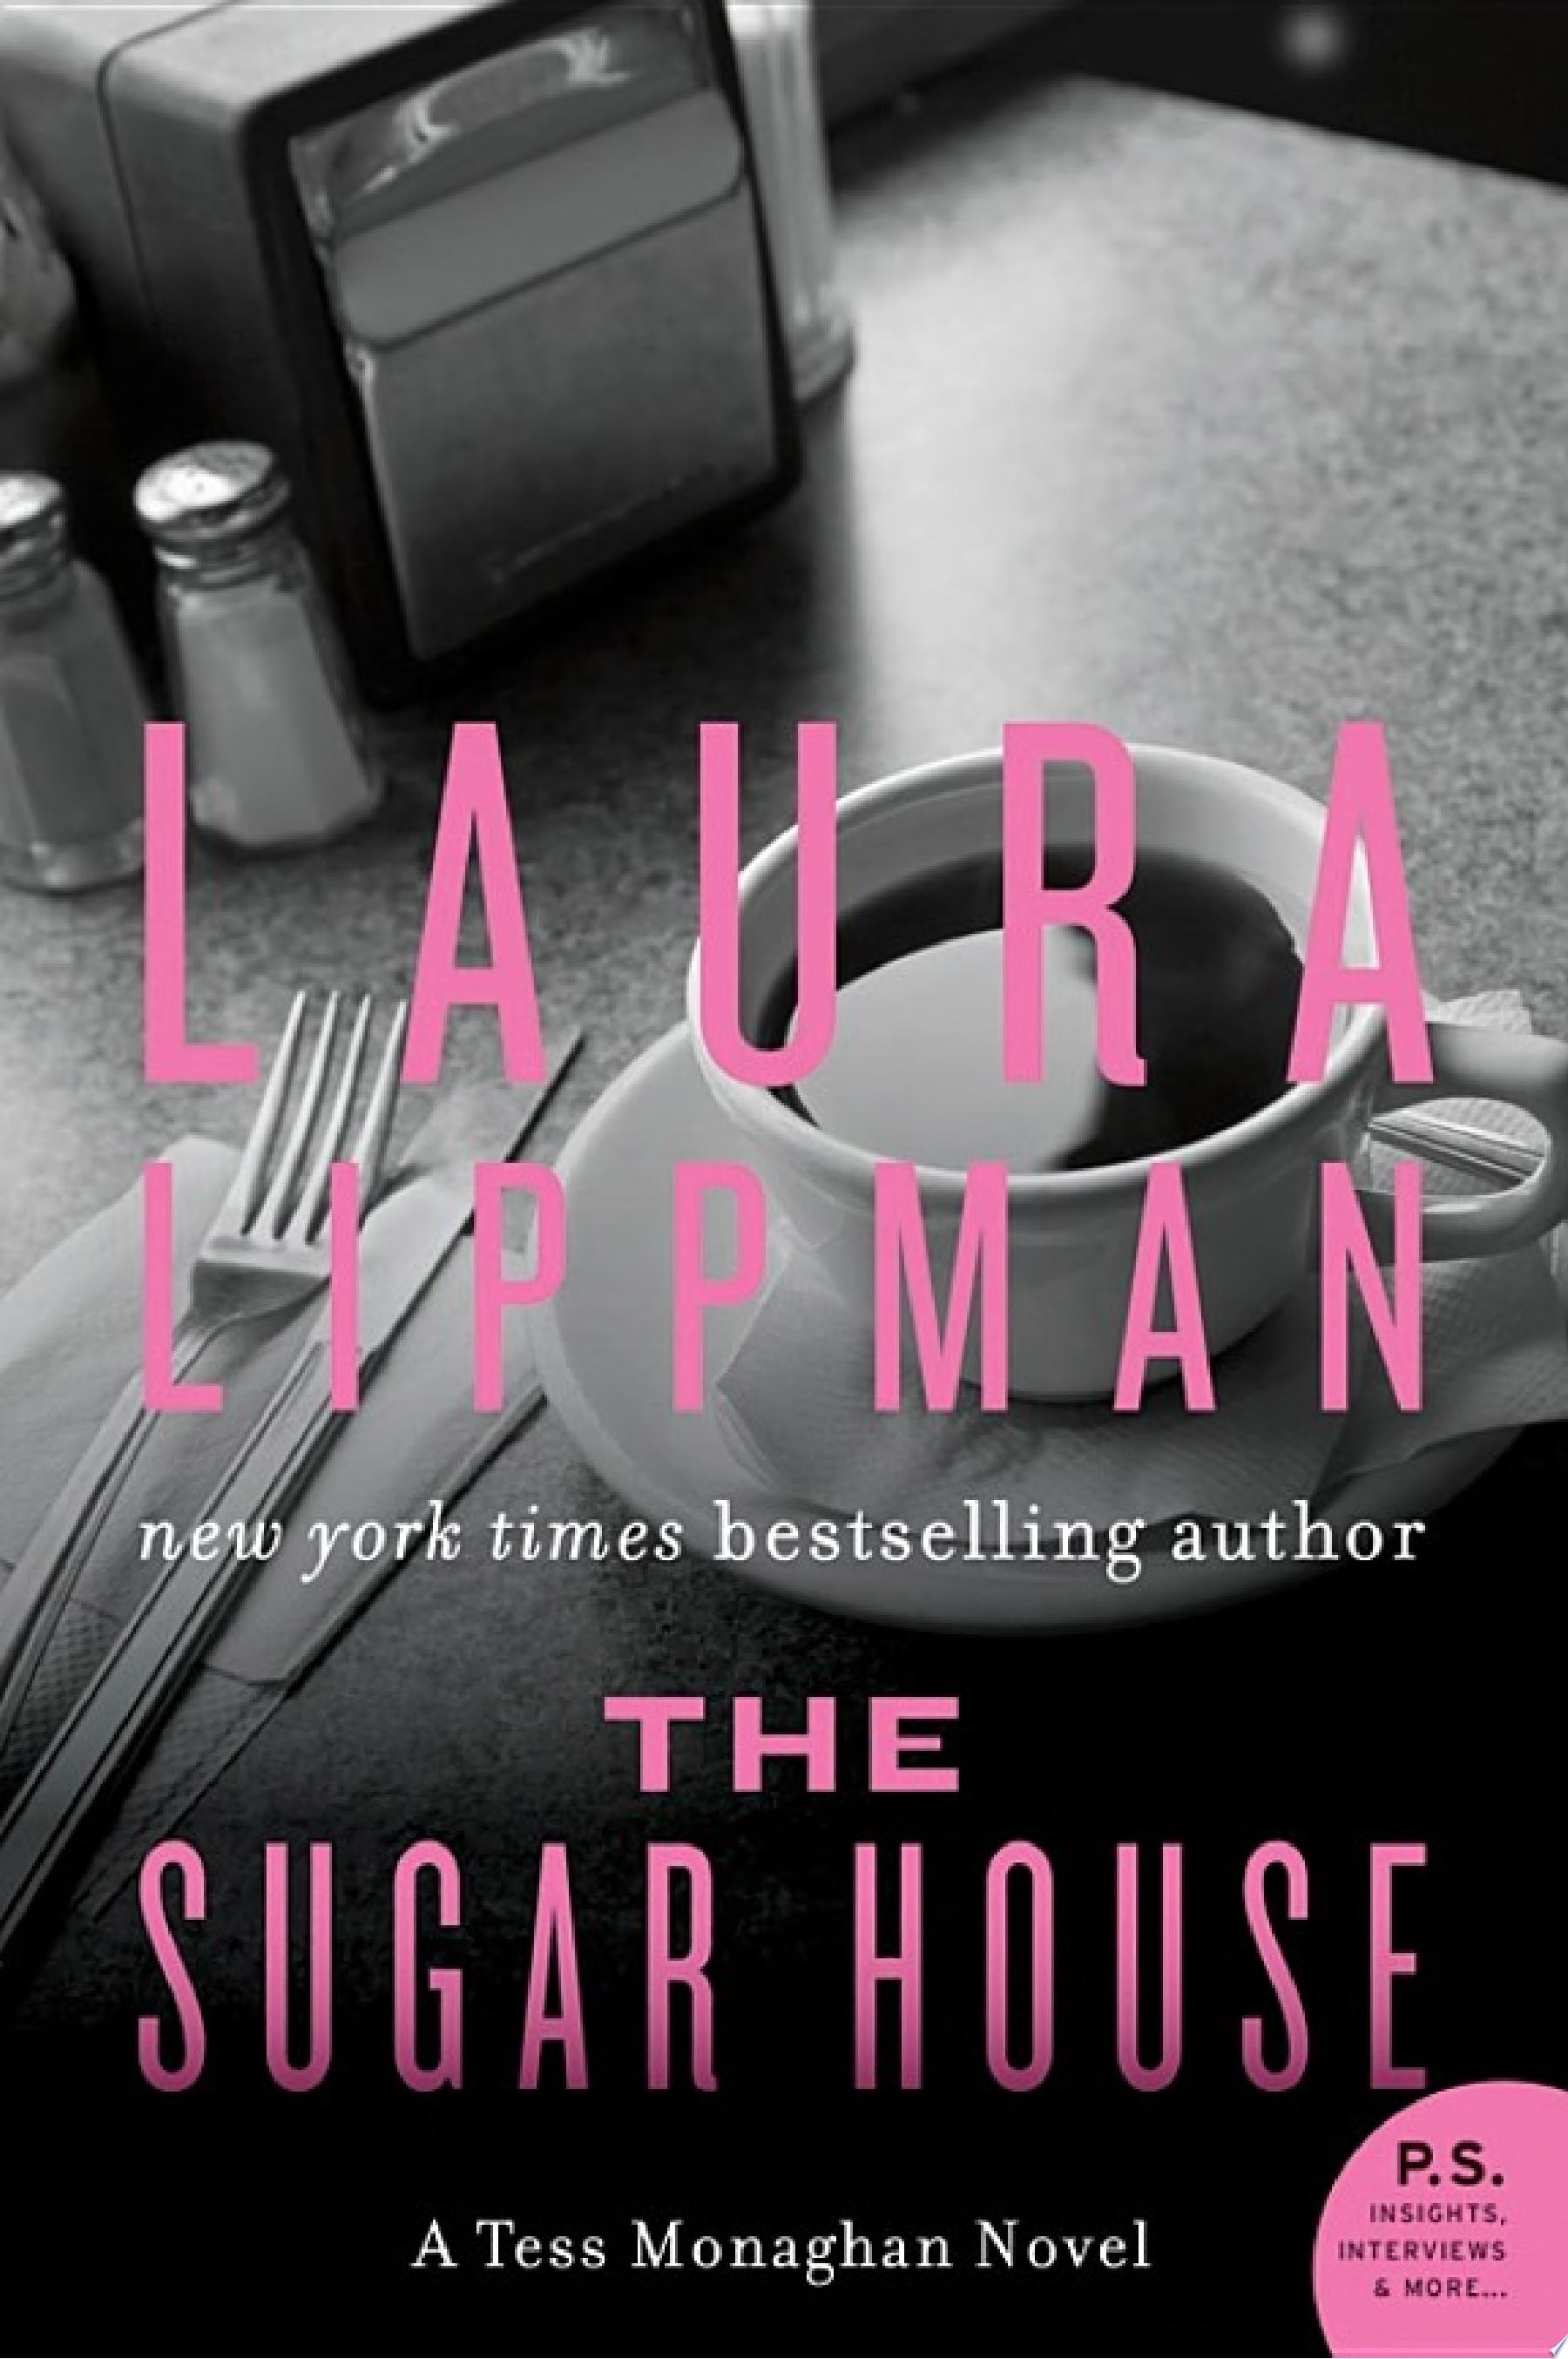 Image for "The Sugar House"